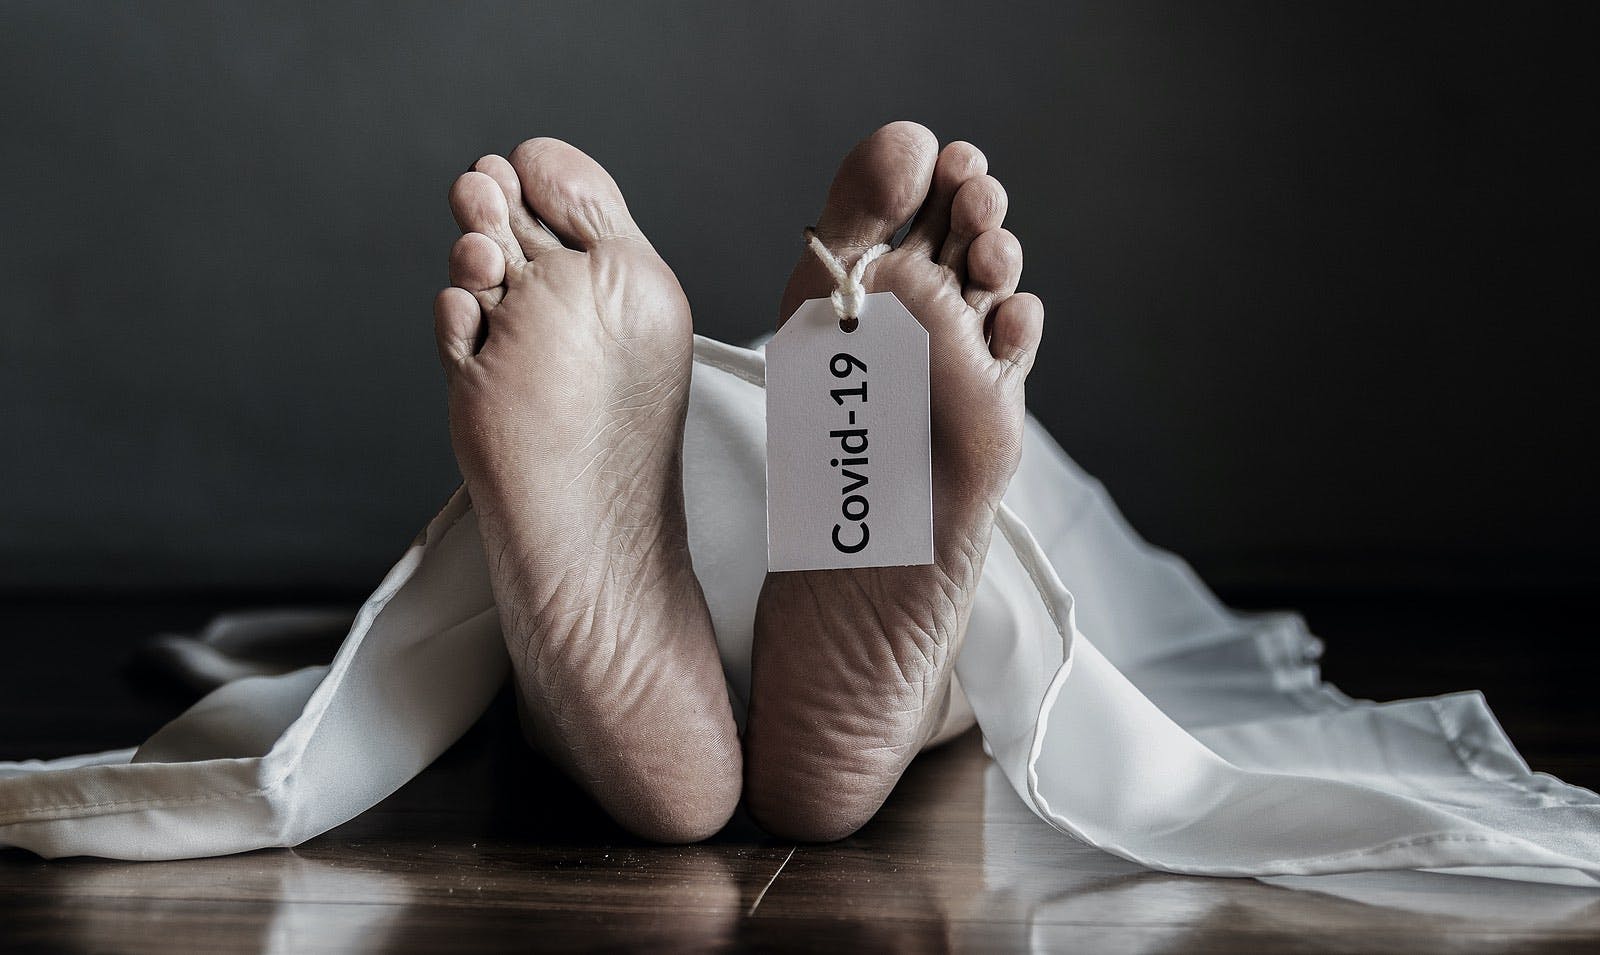 Dead body in morgue with a hanging COVID 19 tag hanging from toe